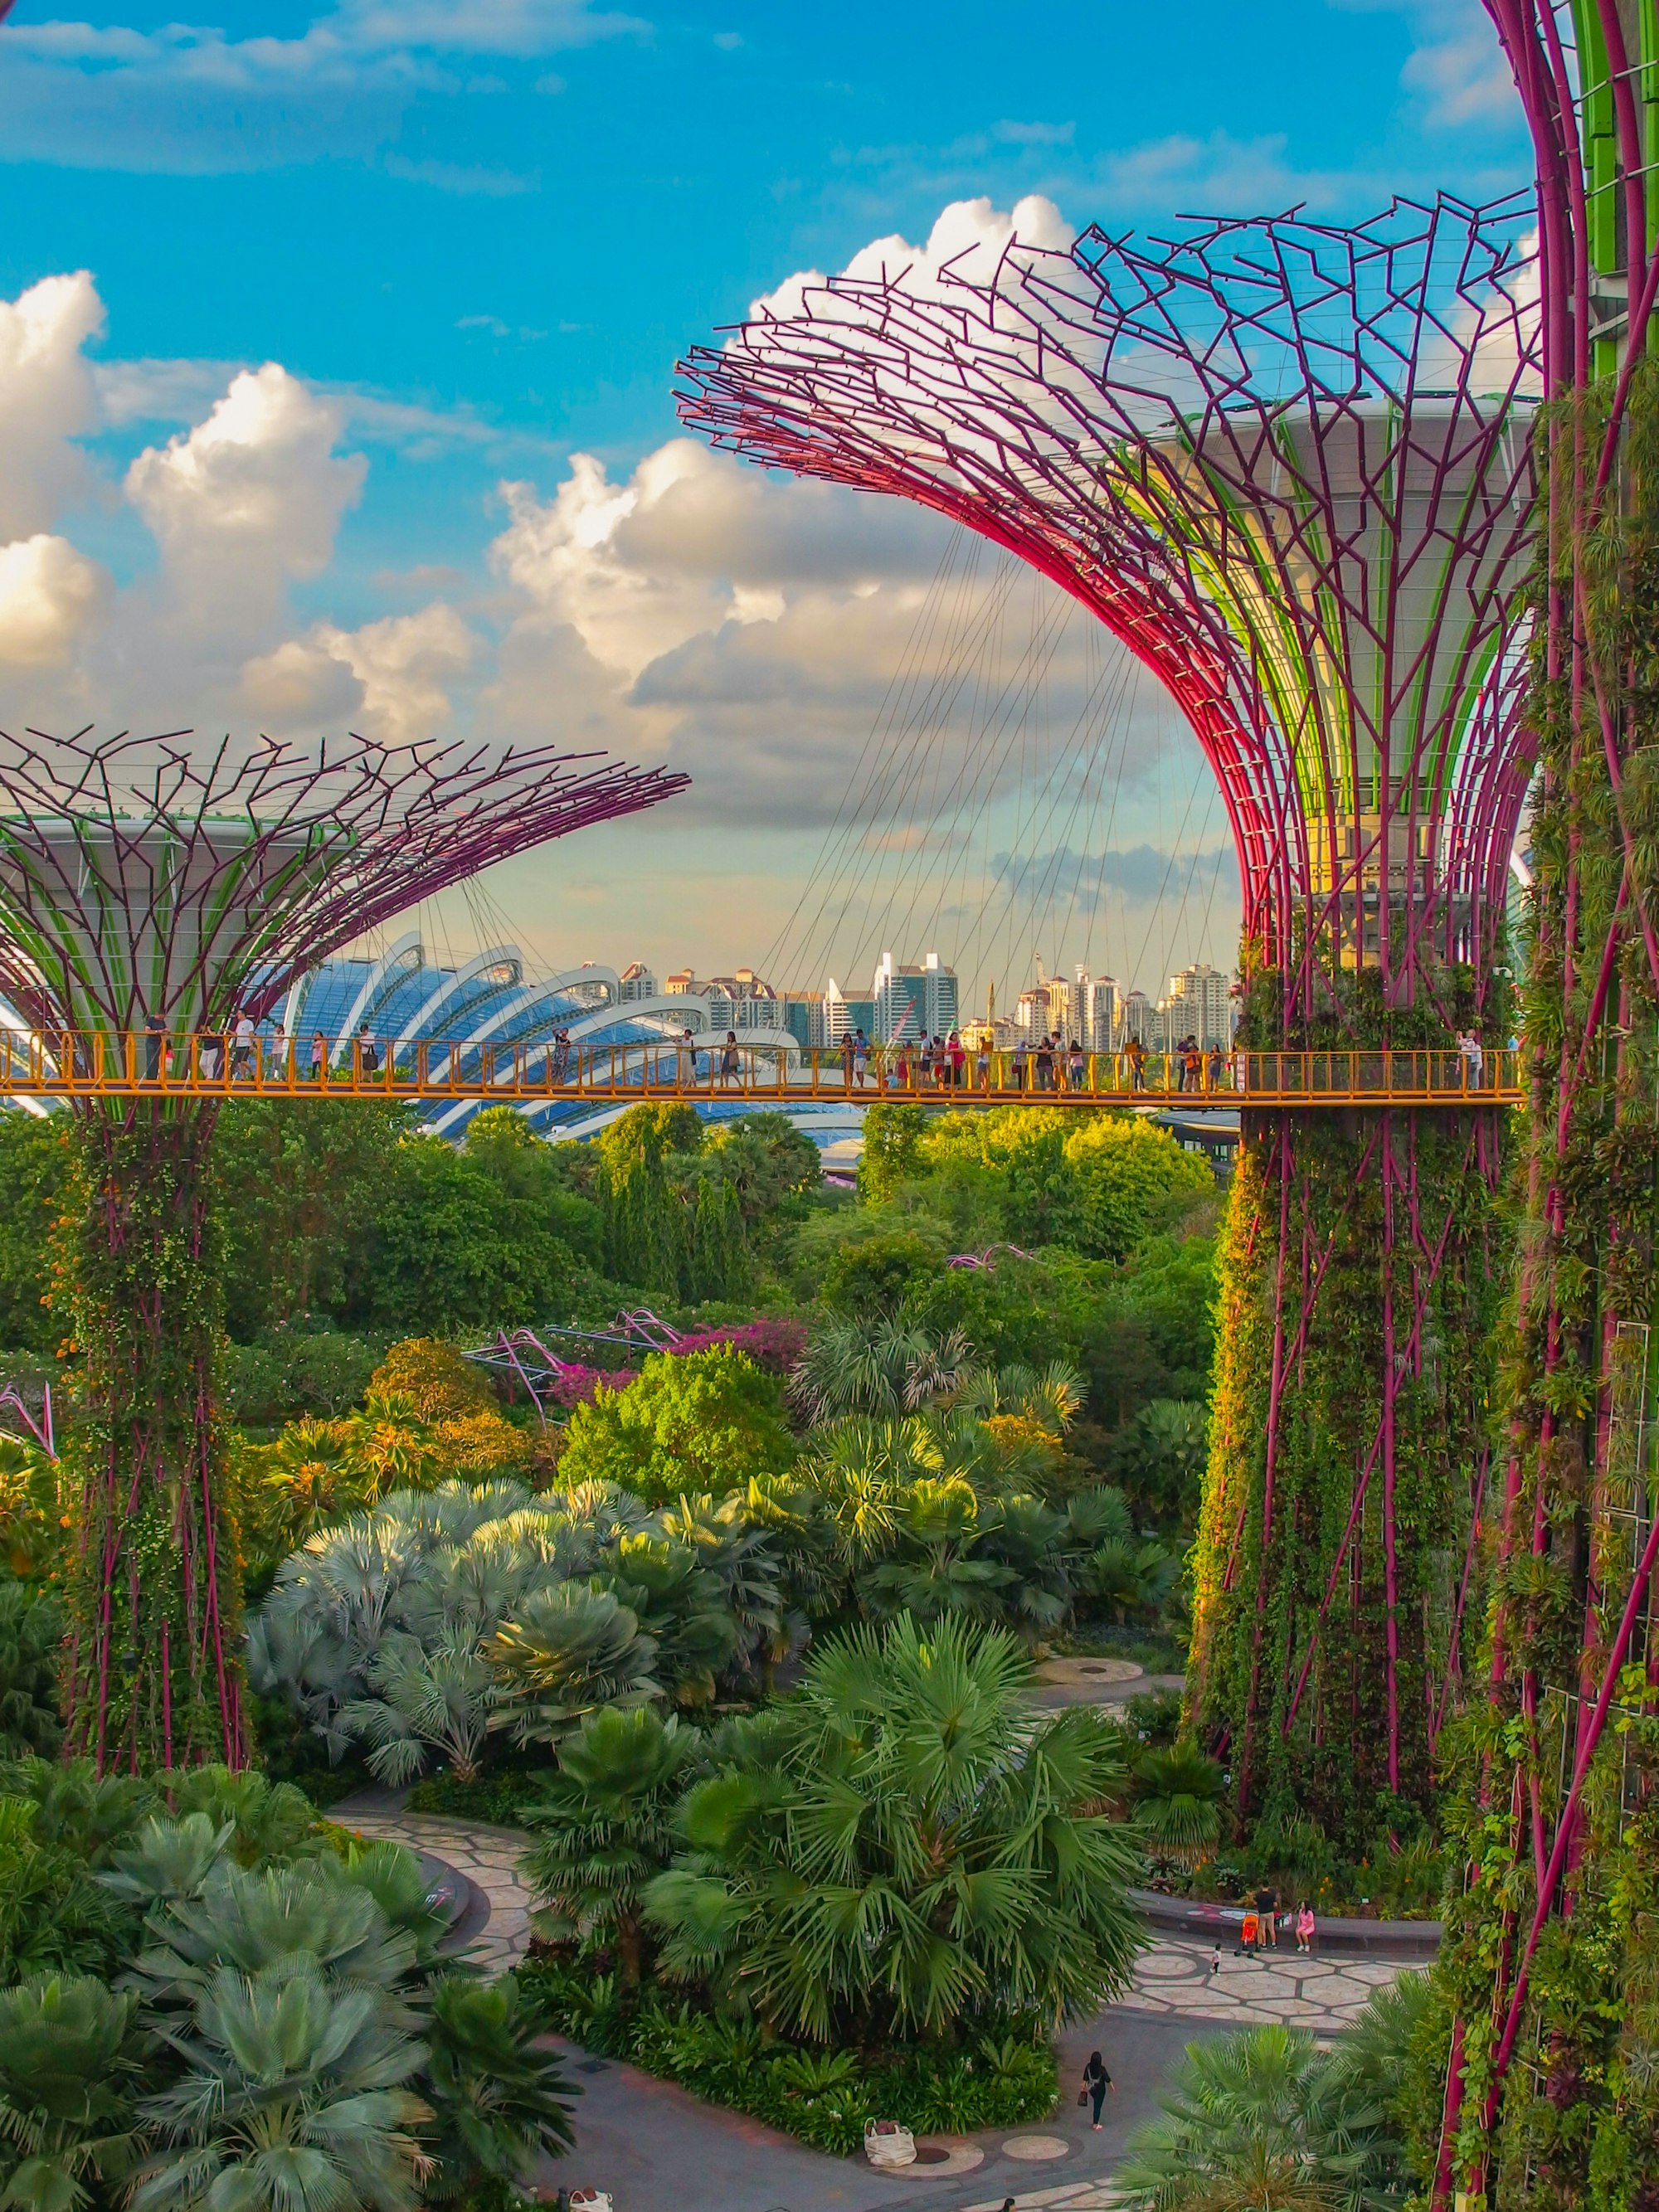 https://thehalalplanet.com I was on a layover in Singapore and decided to visit the Super Tree Grove at Gardens by the Bay. I arrived in the late afternoon and the lighting was brilliant. This is taken from the walkway connecting the trees. Just an amazing site to visit, especially at sunset.